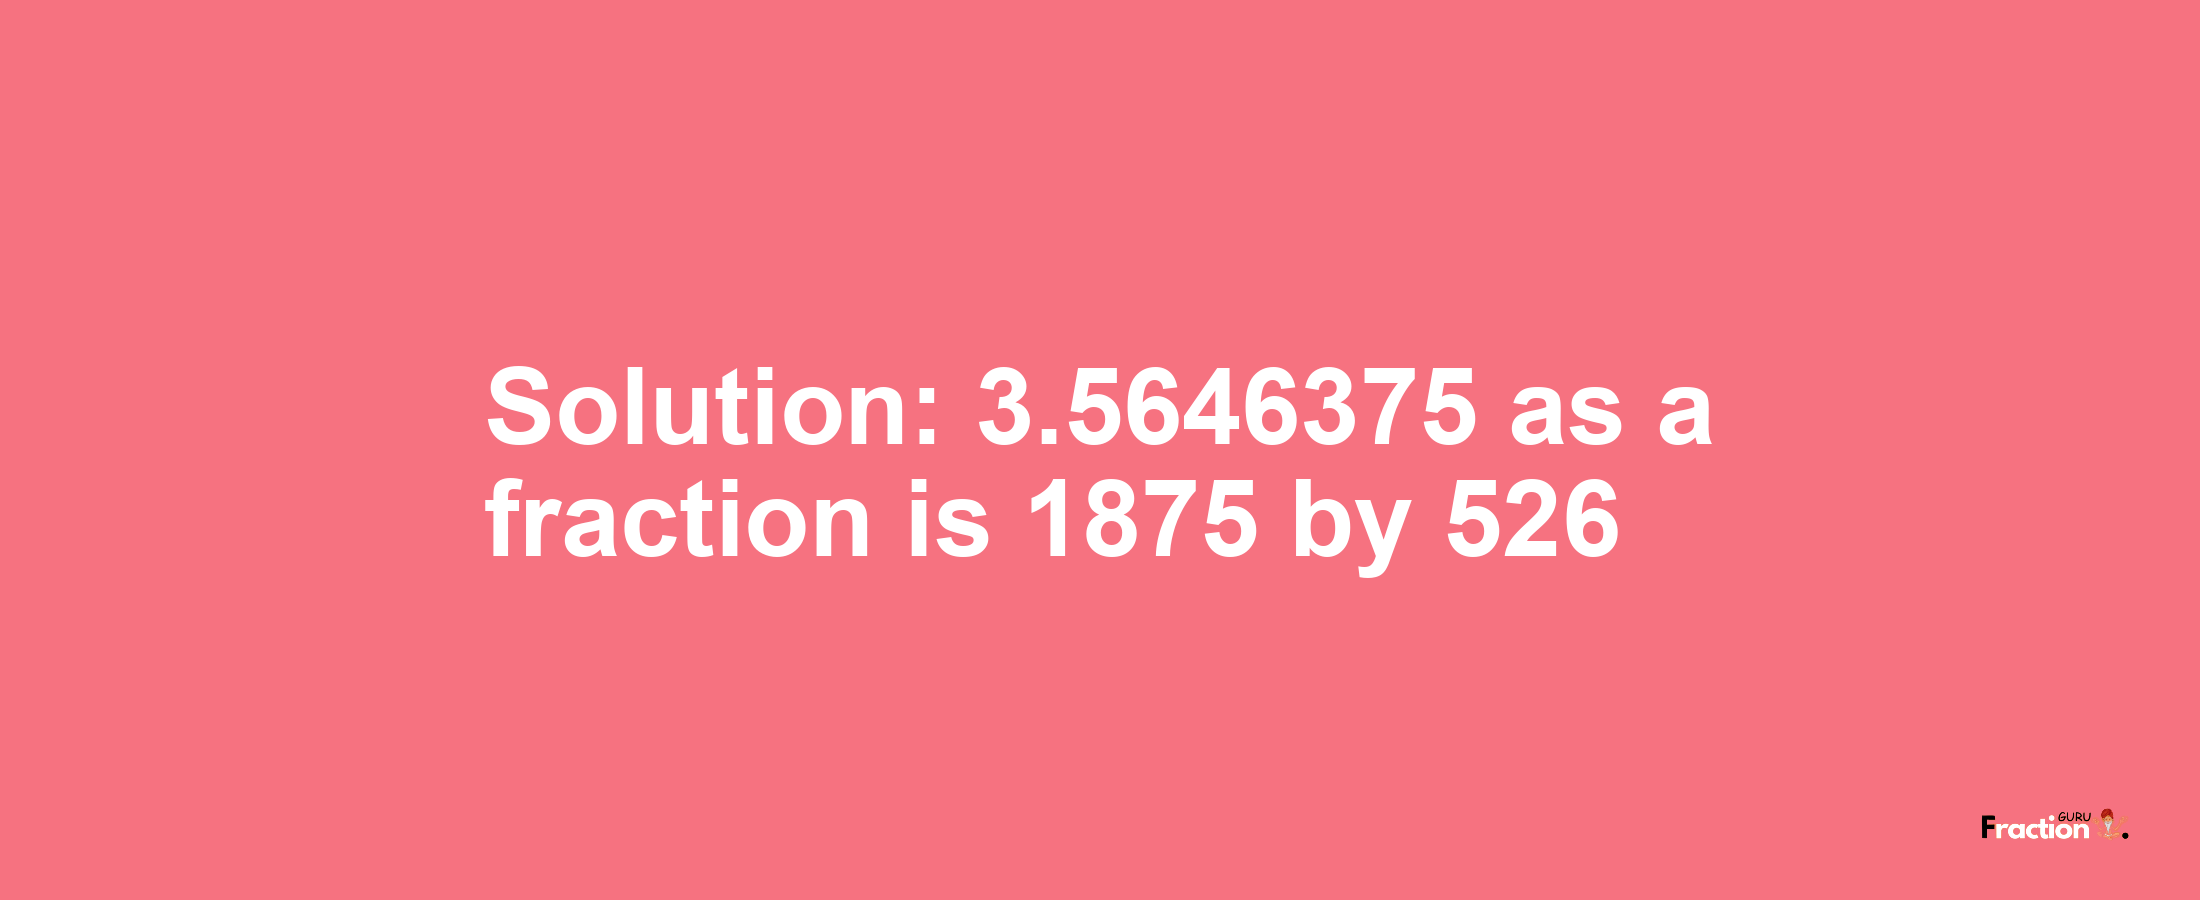 Solution:3.5646375 as a fraction is 1875/526